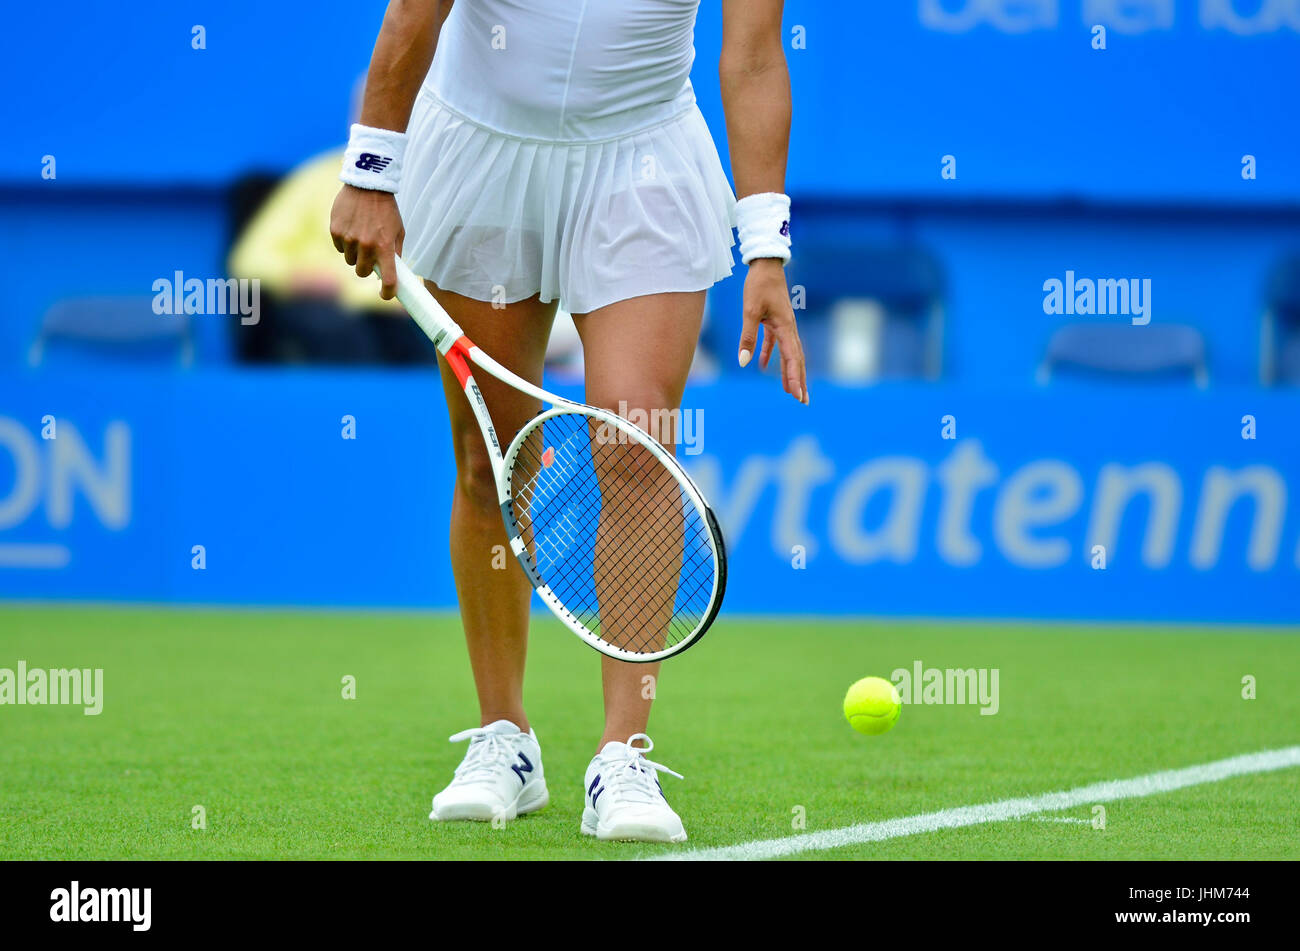 Female tennis player (Heather Watson) bouncing the ball before serving Stock Photo